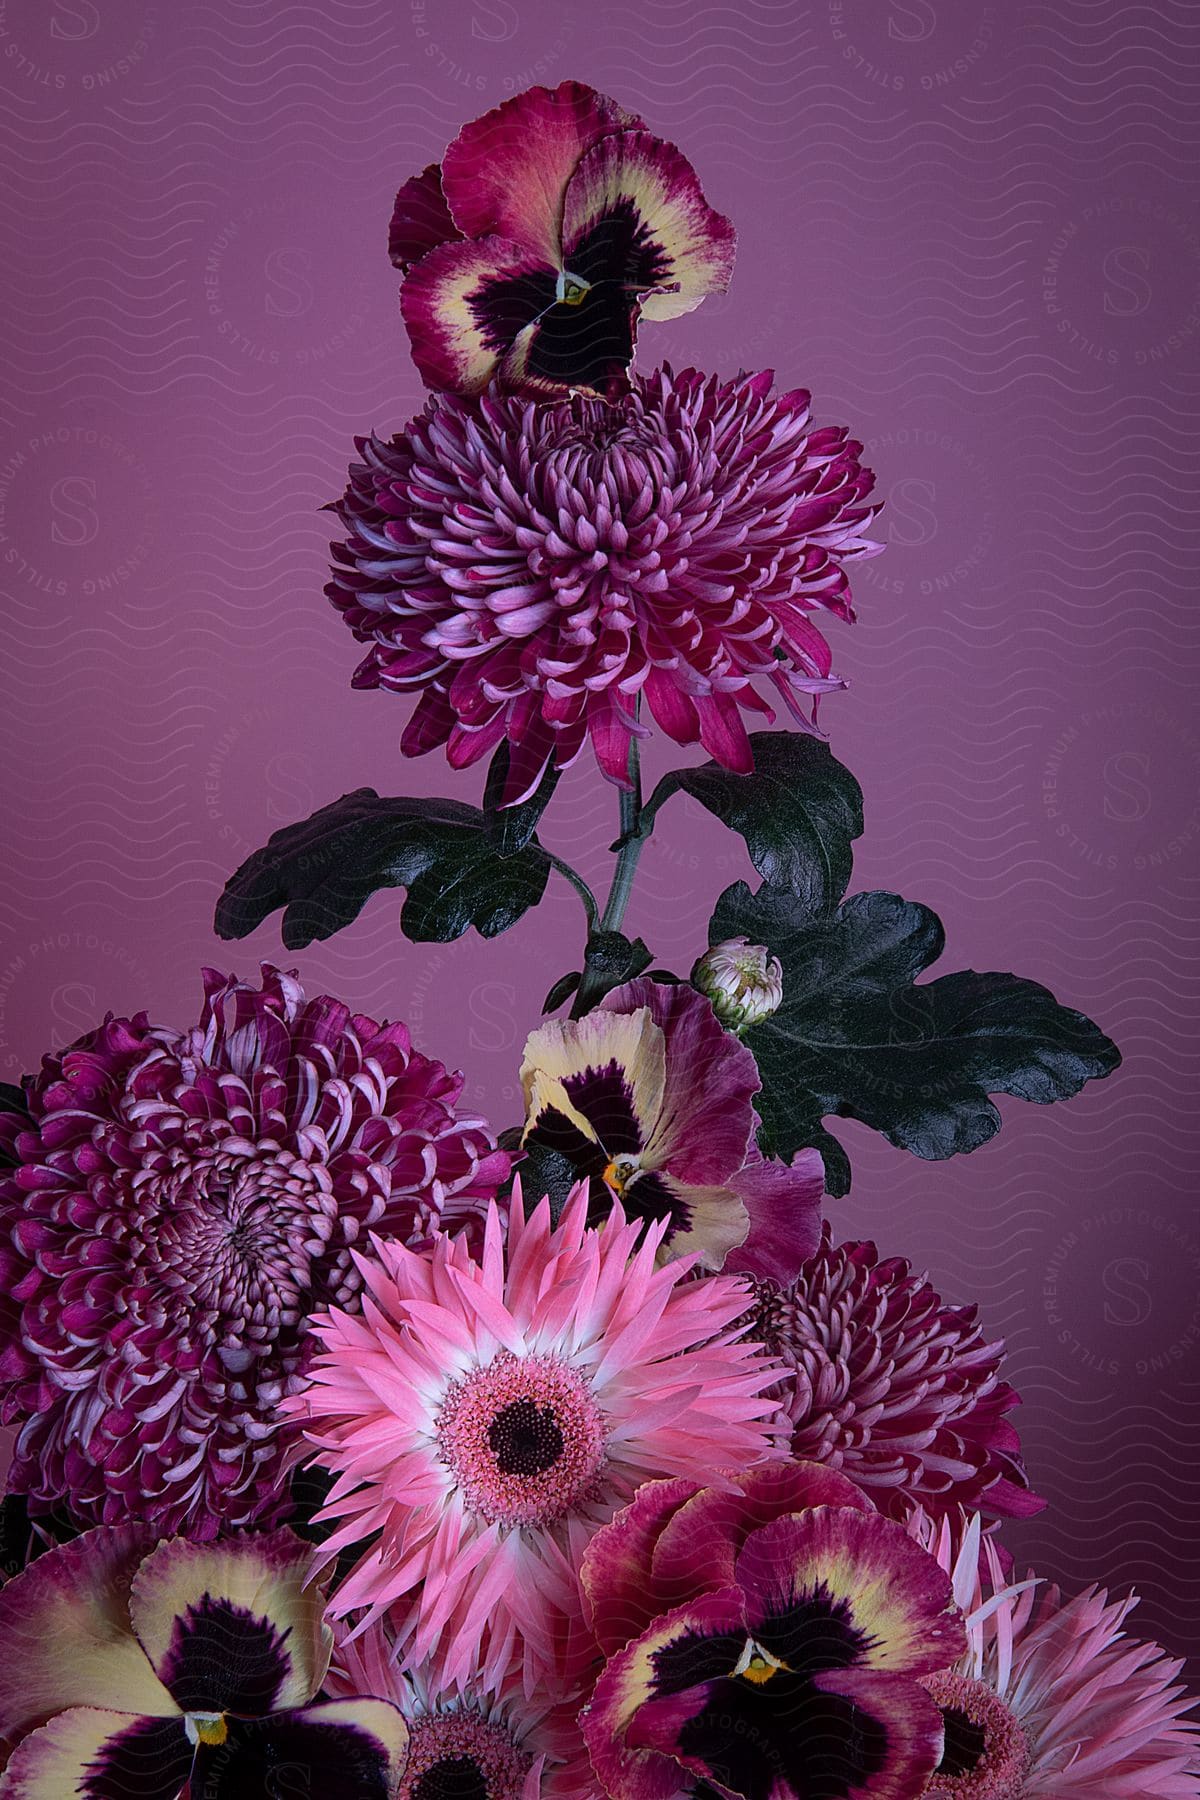 A bouquet of pansies and dahlias are arranged in front of a purple background.